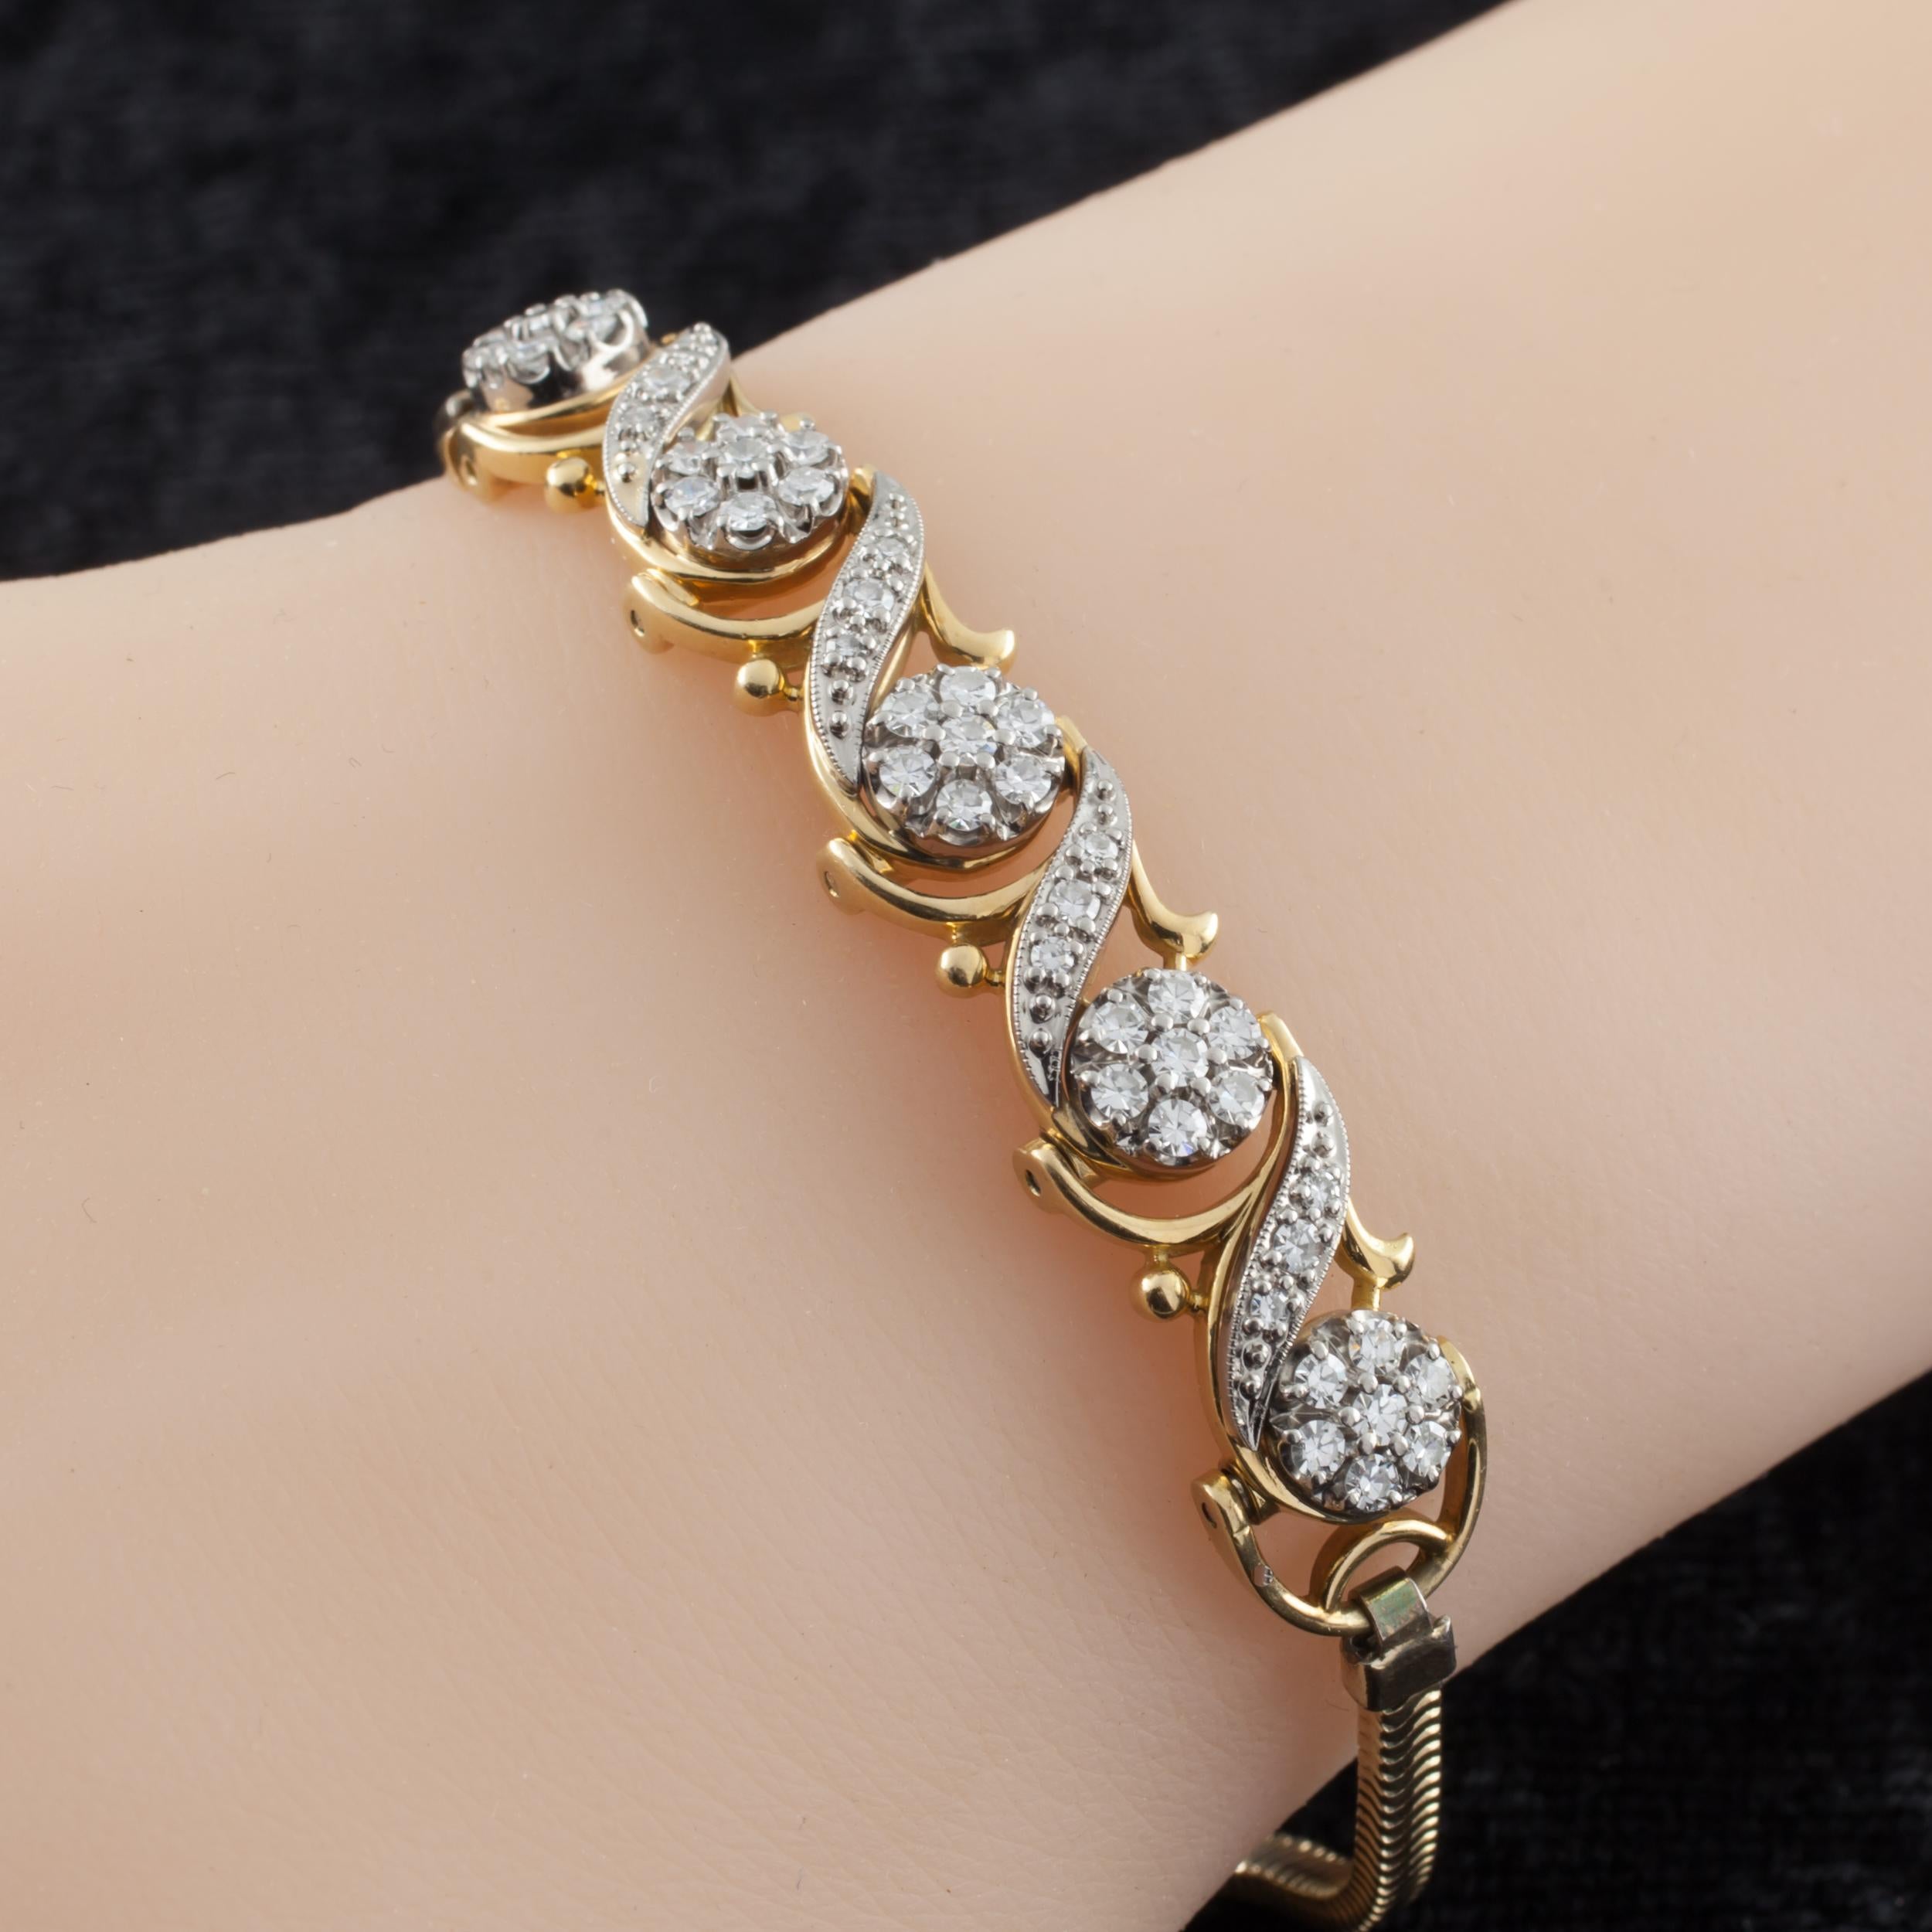 Gorgeous Bracelet by Jabel
Features 5 F58 Links with Diamond Florets and Ribbons
Width of Links = 9 mm
Total Length = 7.5